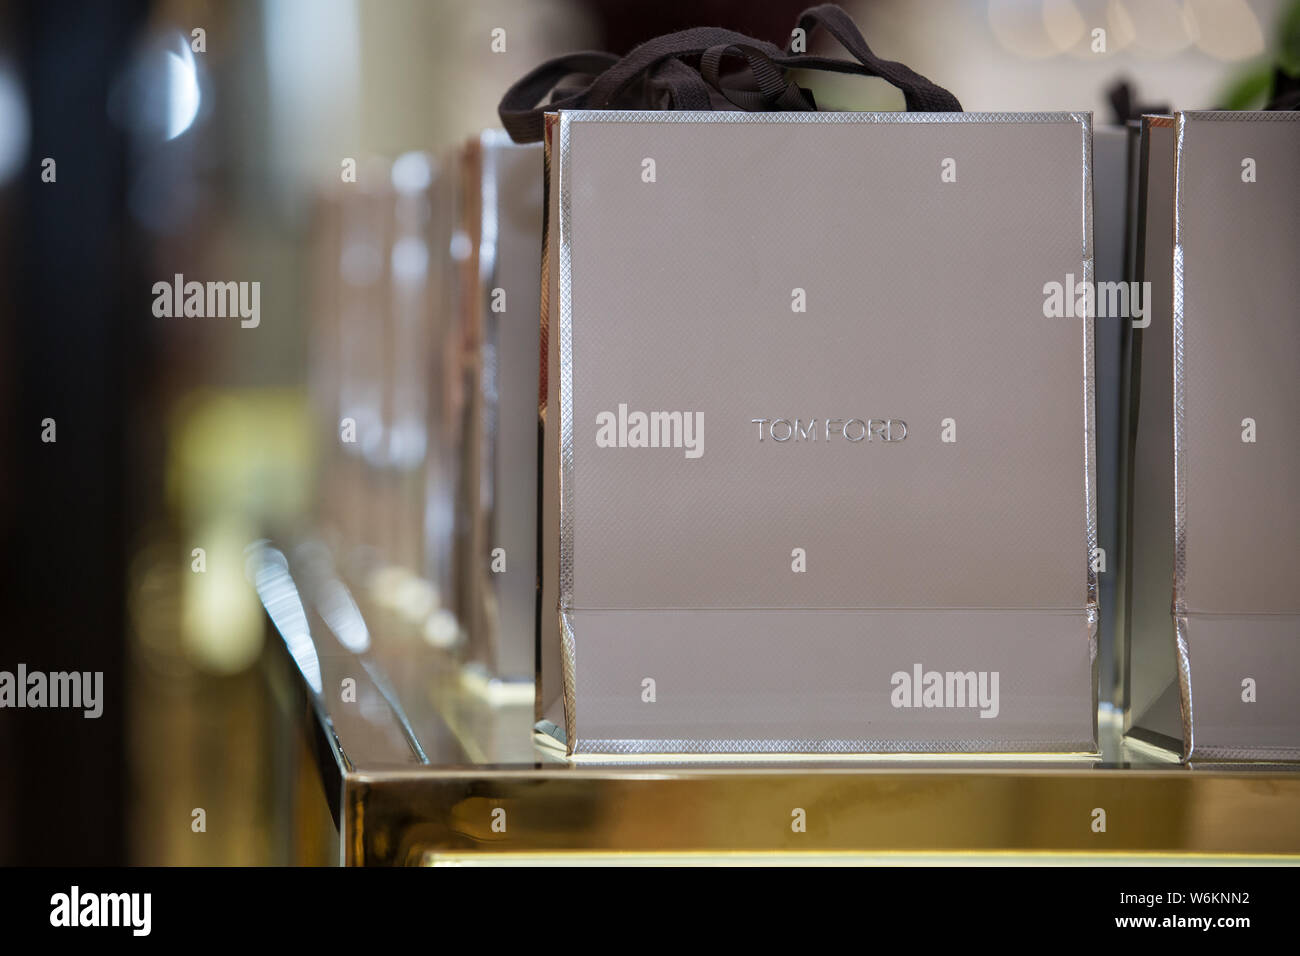 Tom Ford shopping bags at a luxury store, Melbourne, Australia Stock Photo